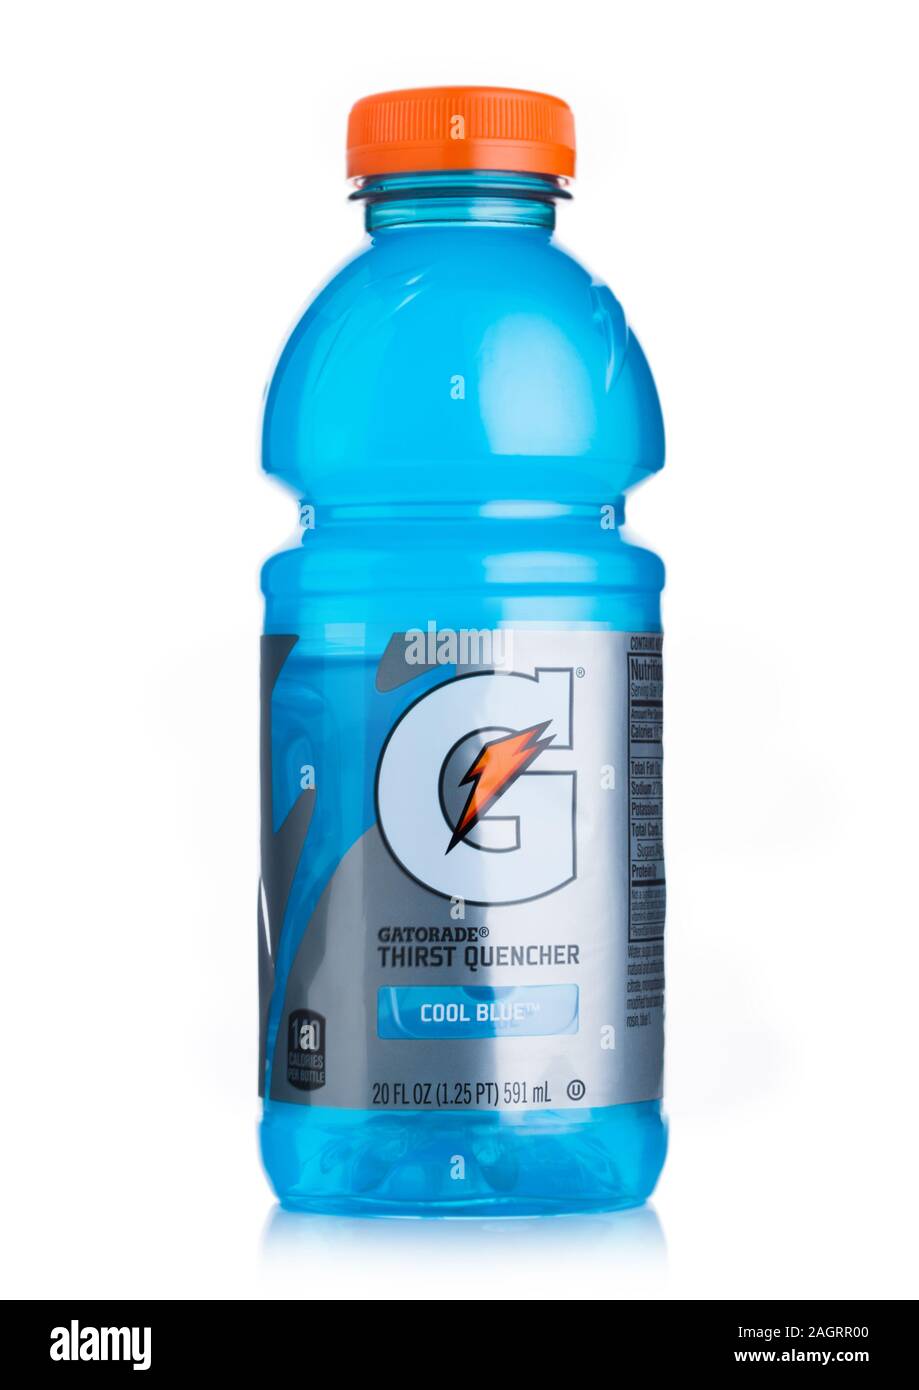 GATORADE SQUEEZE SPORTS WATER BOTTLE SOCCER CHAMPIONS LEAGUE 32 OZ lot of 5